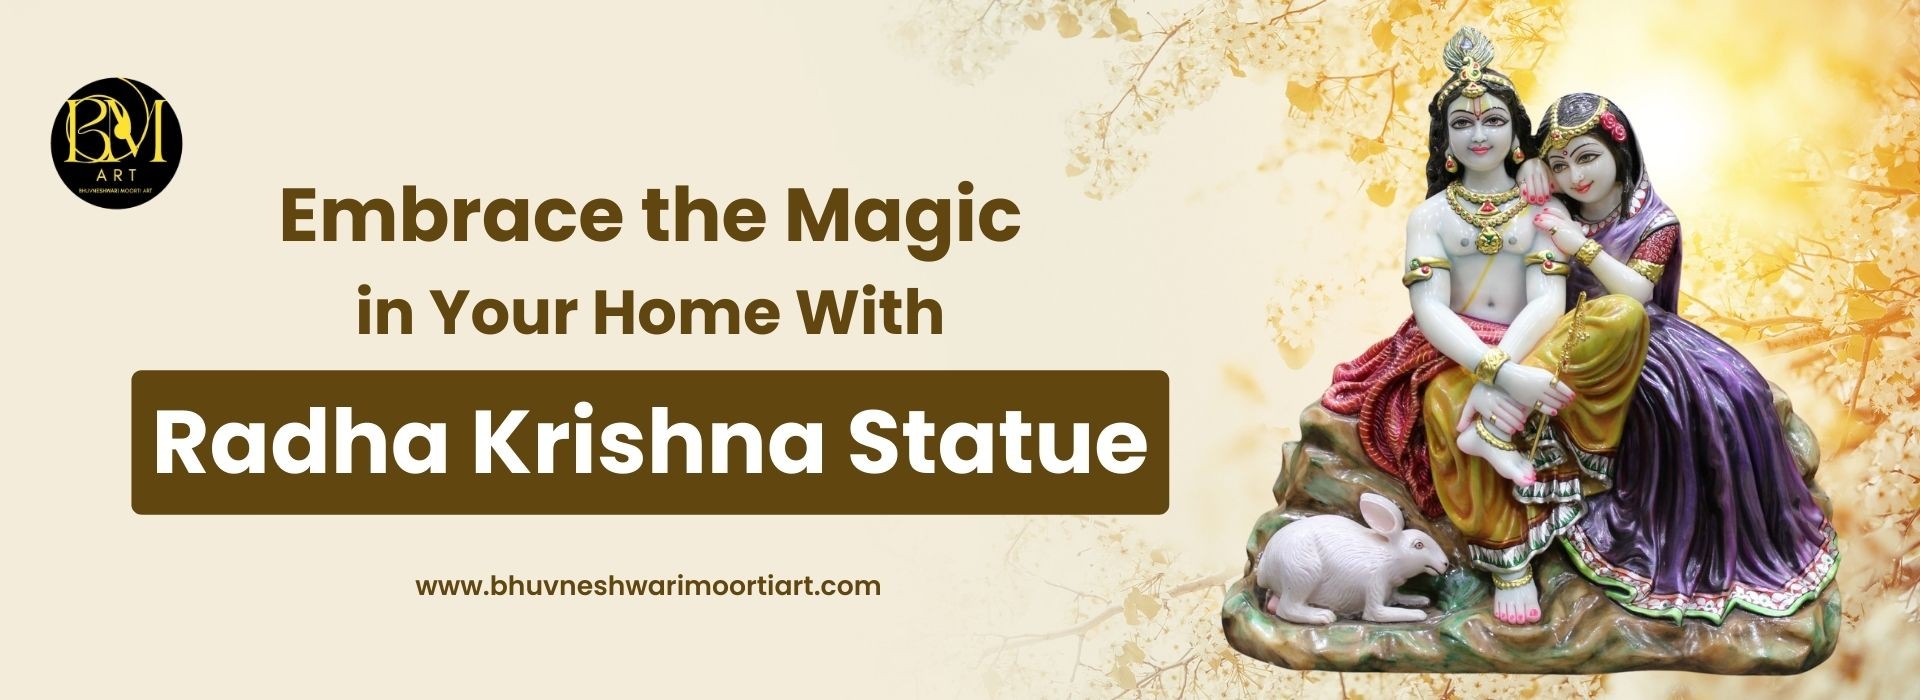 Embrace the Magic in Your Home with Marble Radha Krishna Statue